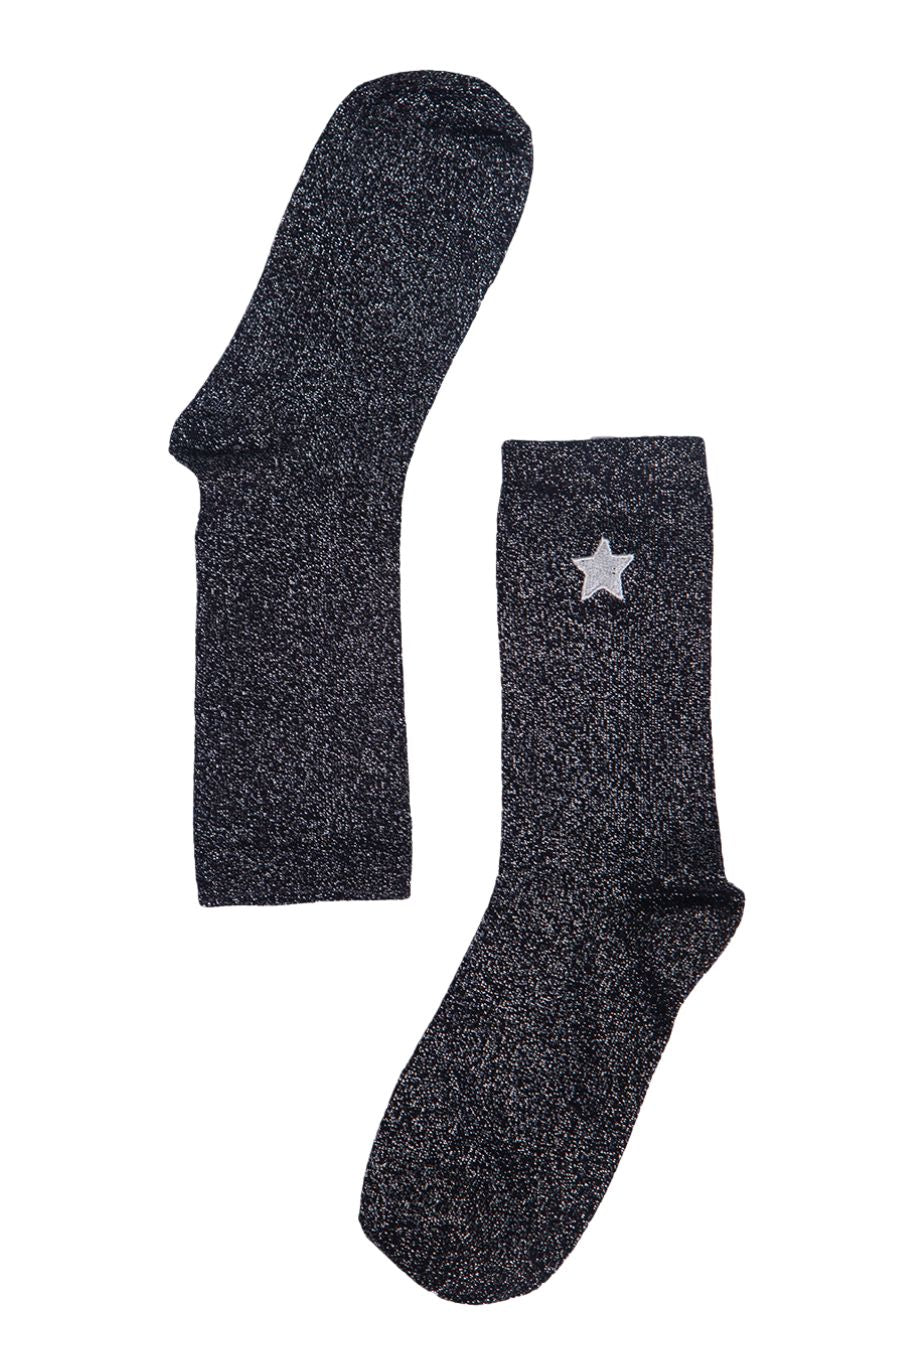 black silver glitter ankle socks with silver embroidered star